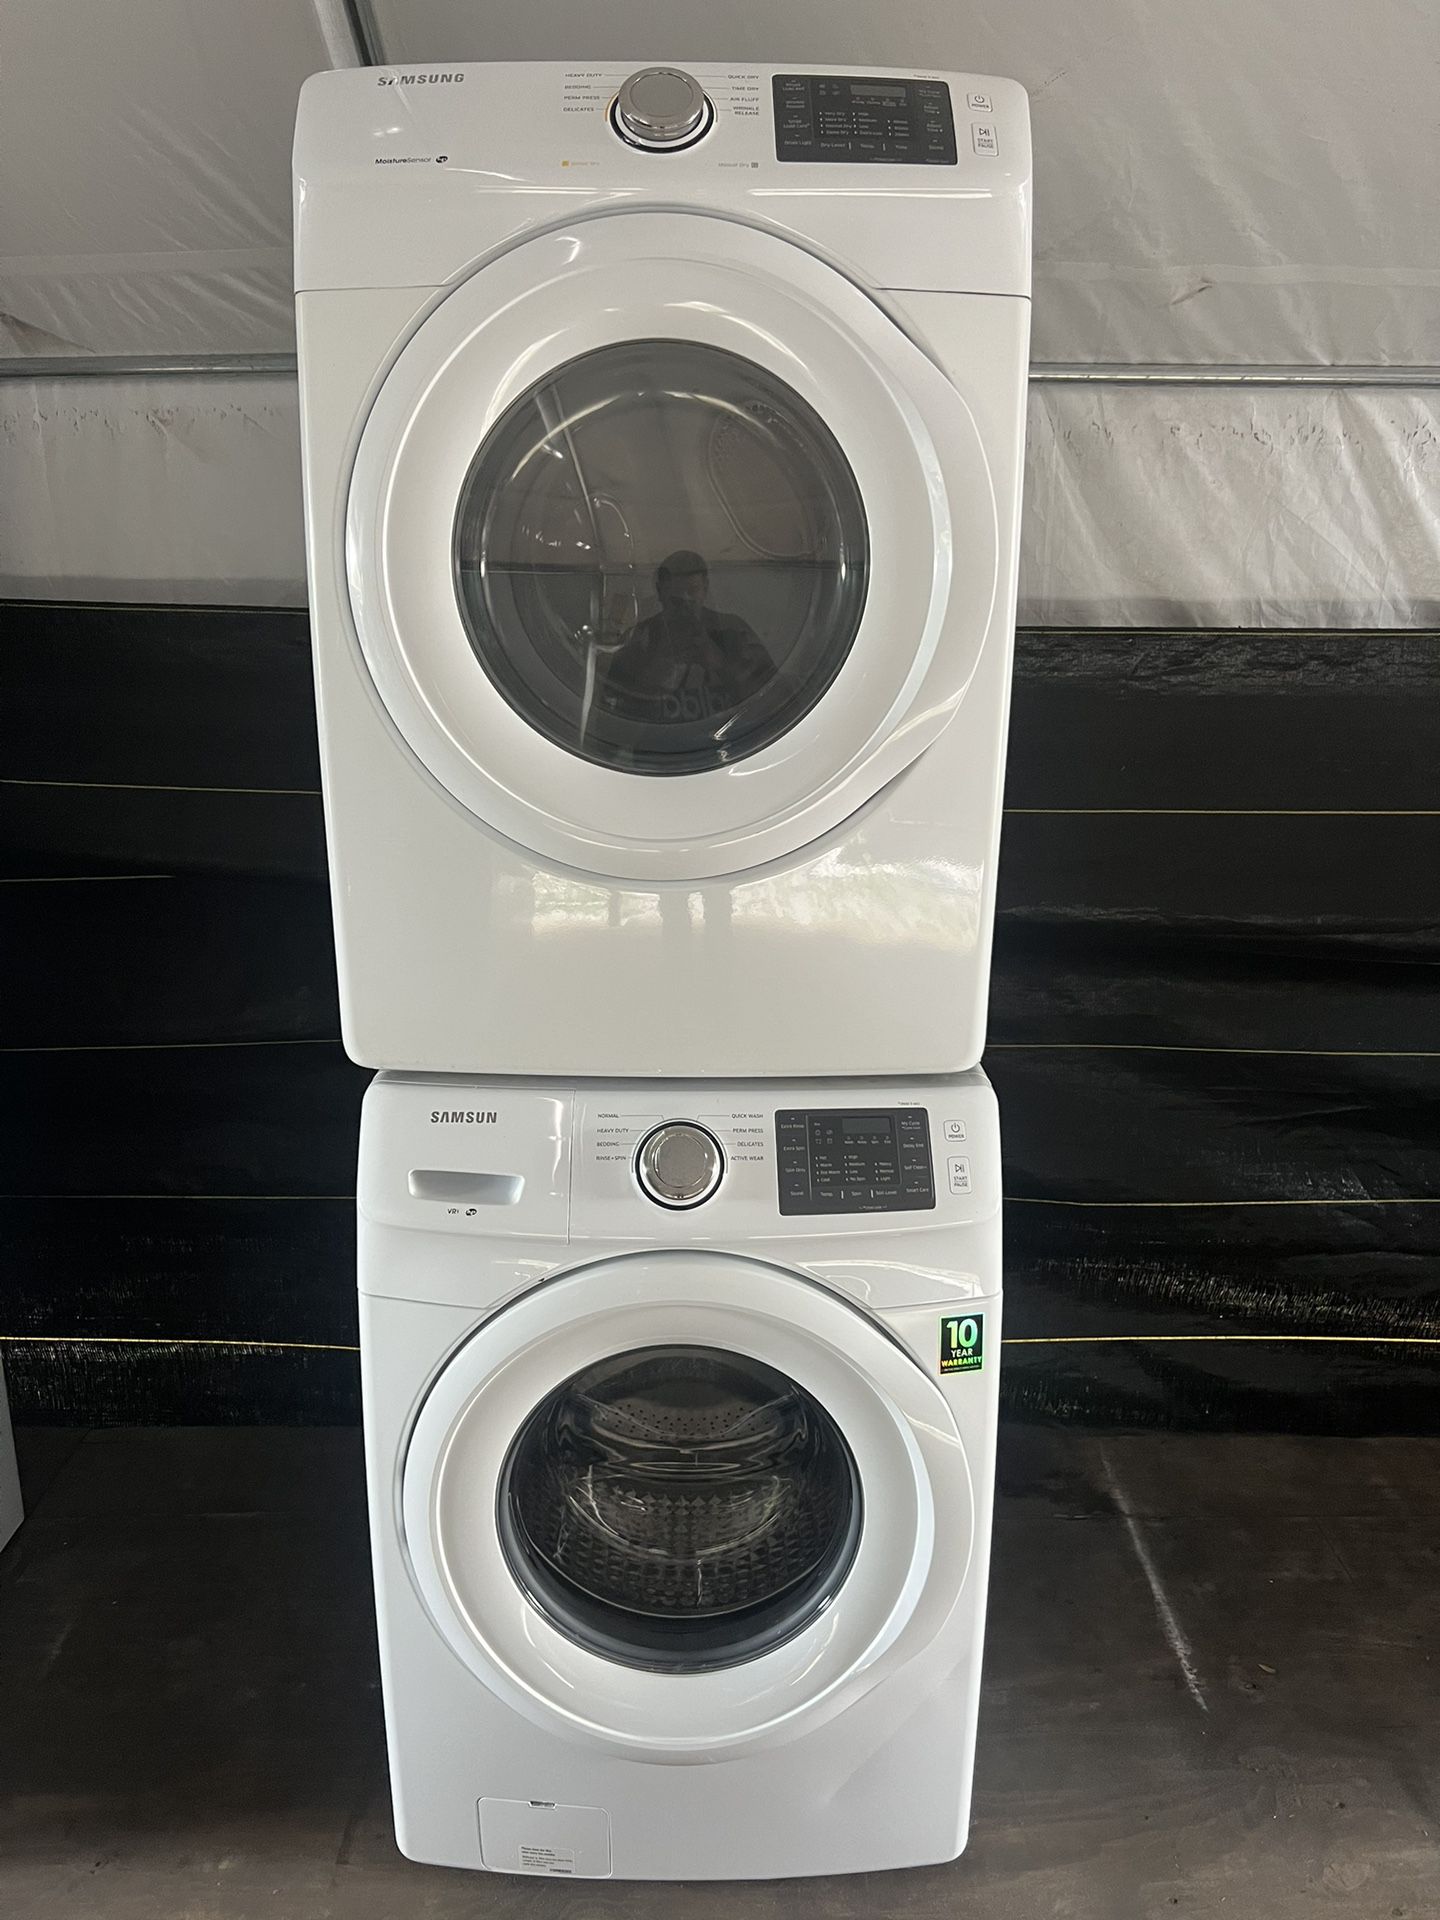 Samsung Washer&dryer Frontload Set   60 day warranty/ Located at:📍5415 Carmack Rd Tampa Fl 33610📍